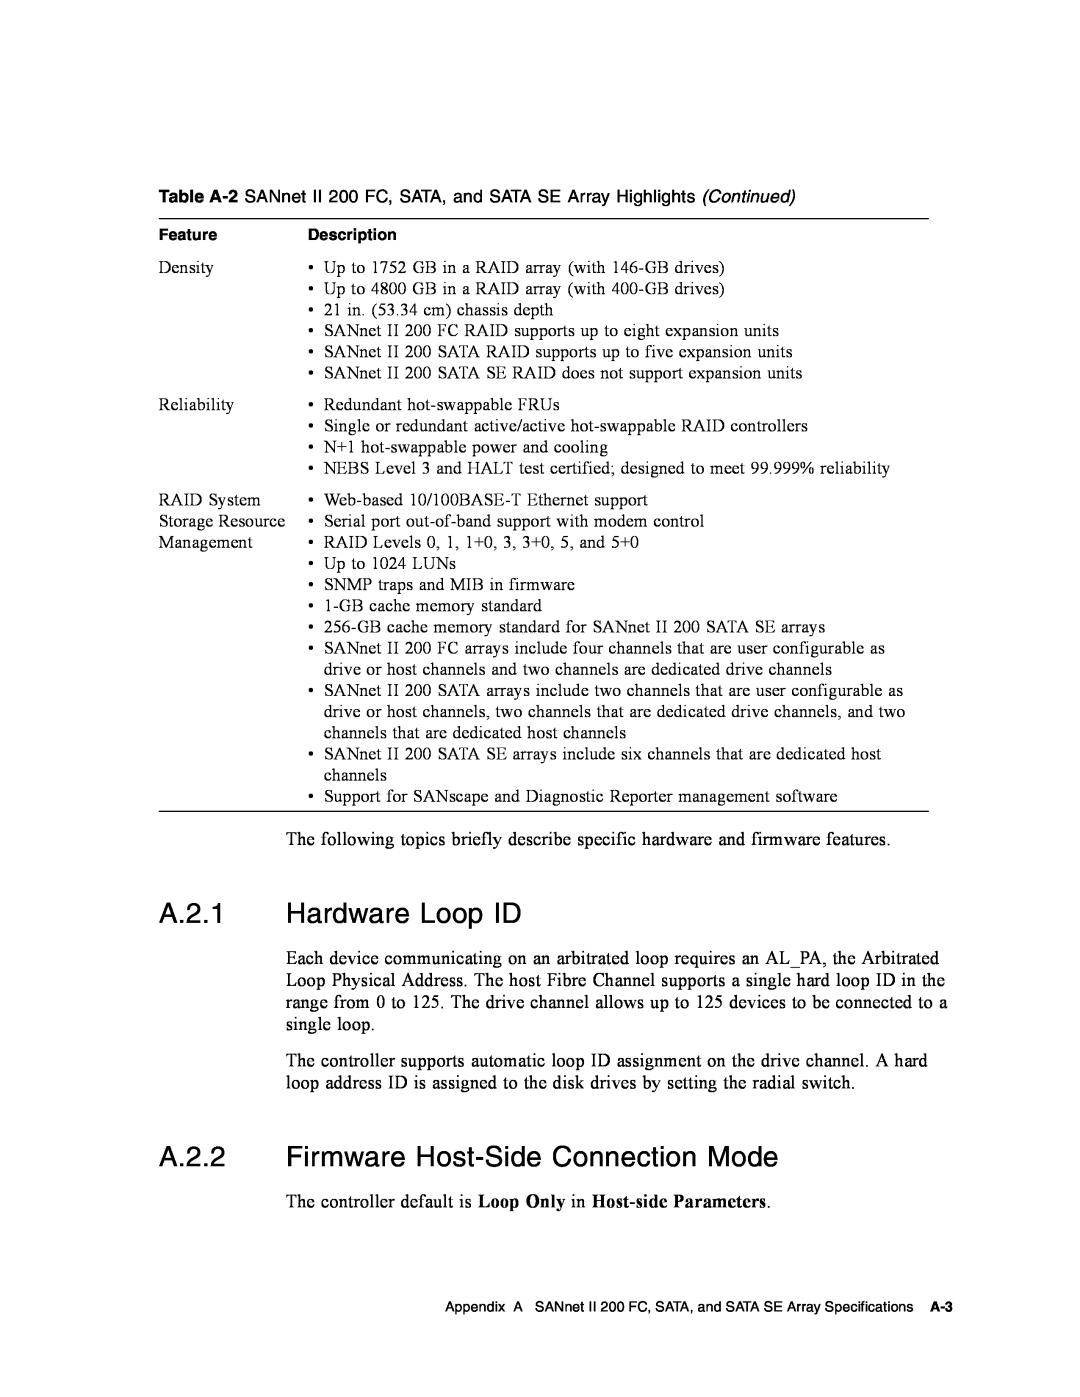 Dot Hill Systems II 200 FC service manual A.2.1 Hardware Loop ID, A.2.2 Firmware Host-Side Connection Mode 